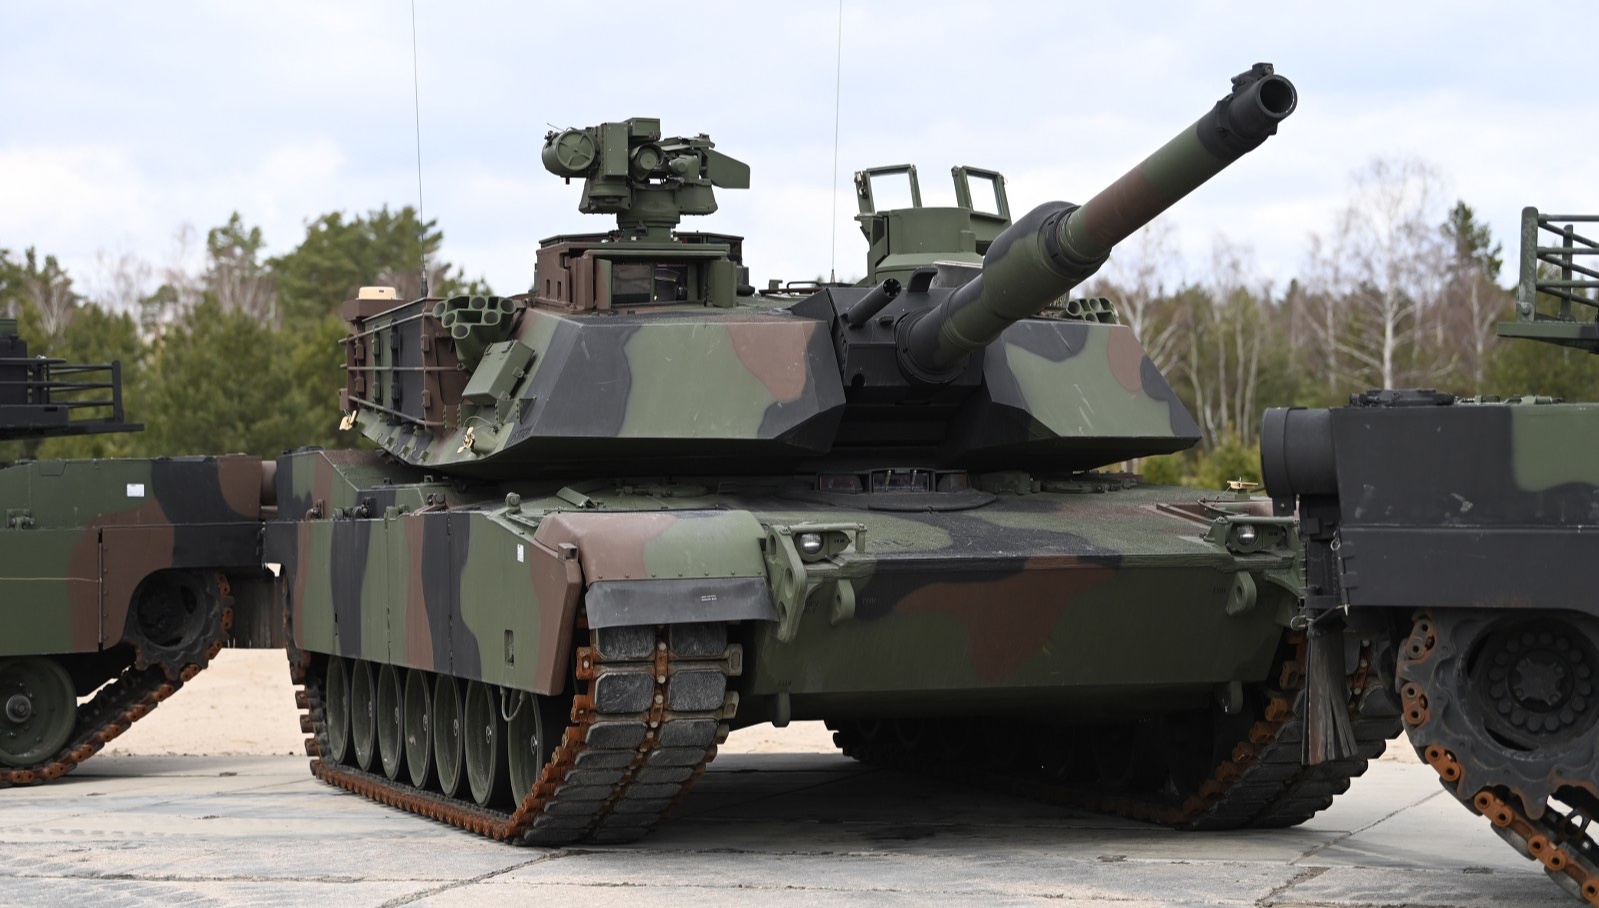 Abrams tanks will supply the Polish Army. For the Armed Forces